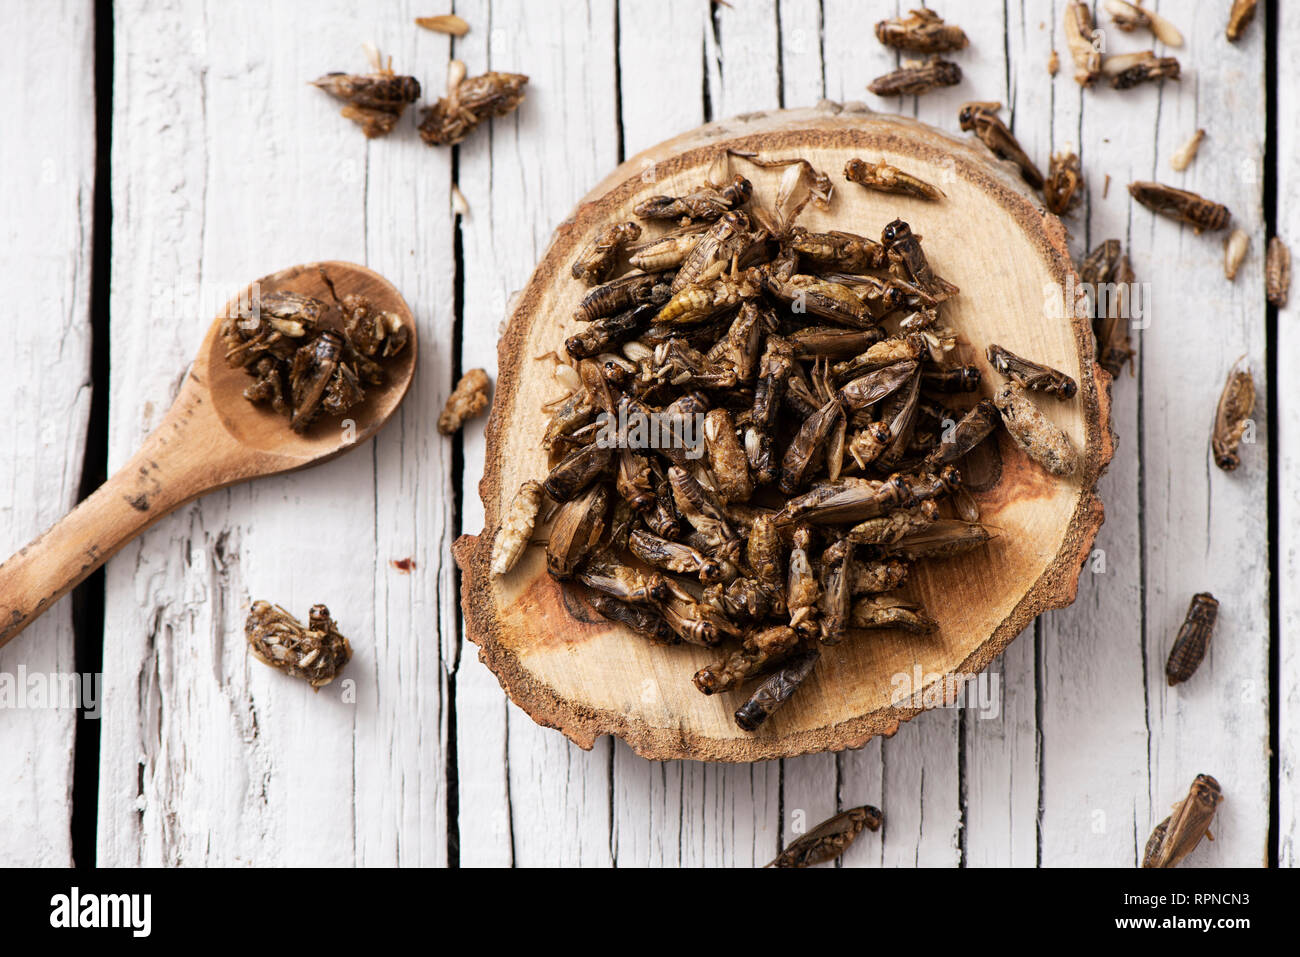 high angle view of a pile of fried crickets seasoned with onion and barbecue sauce, on a wooden tray, on a rustic white wooden table Stock Photo